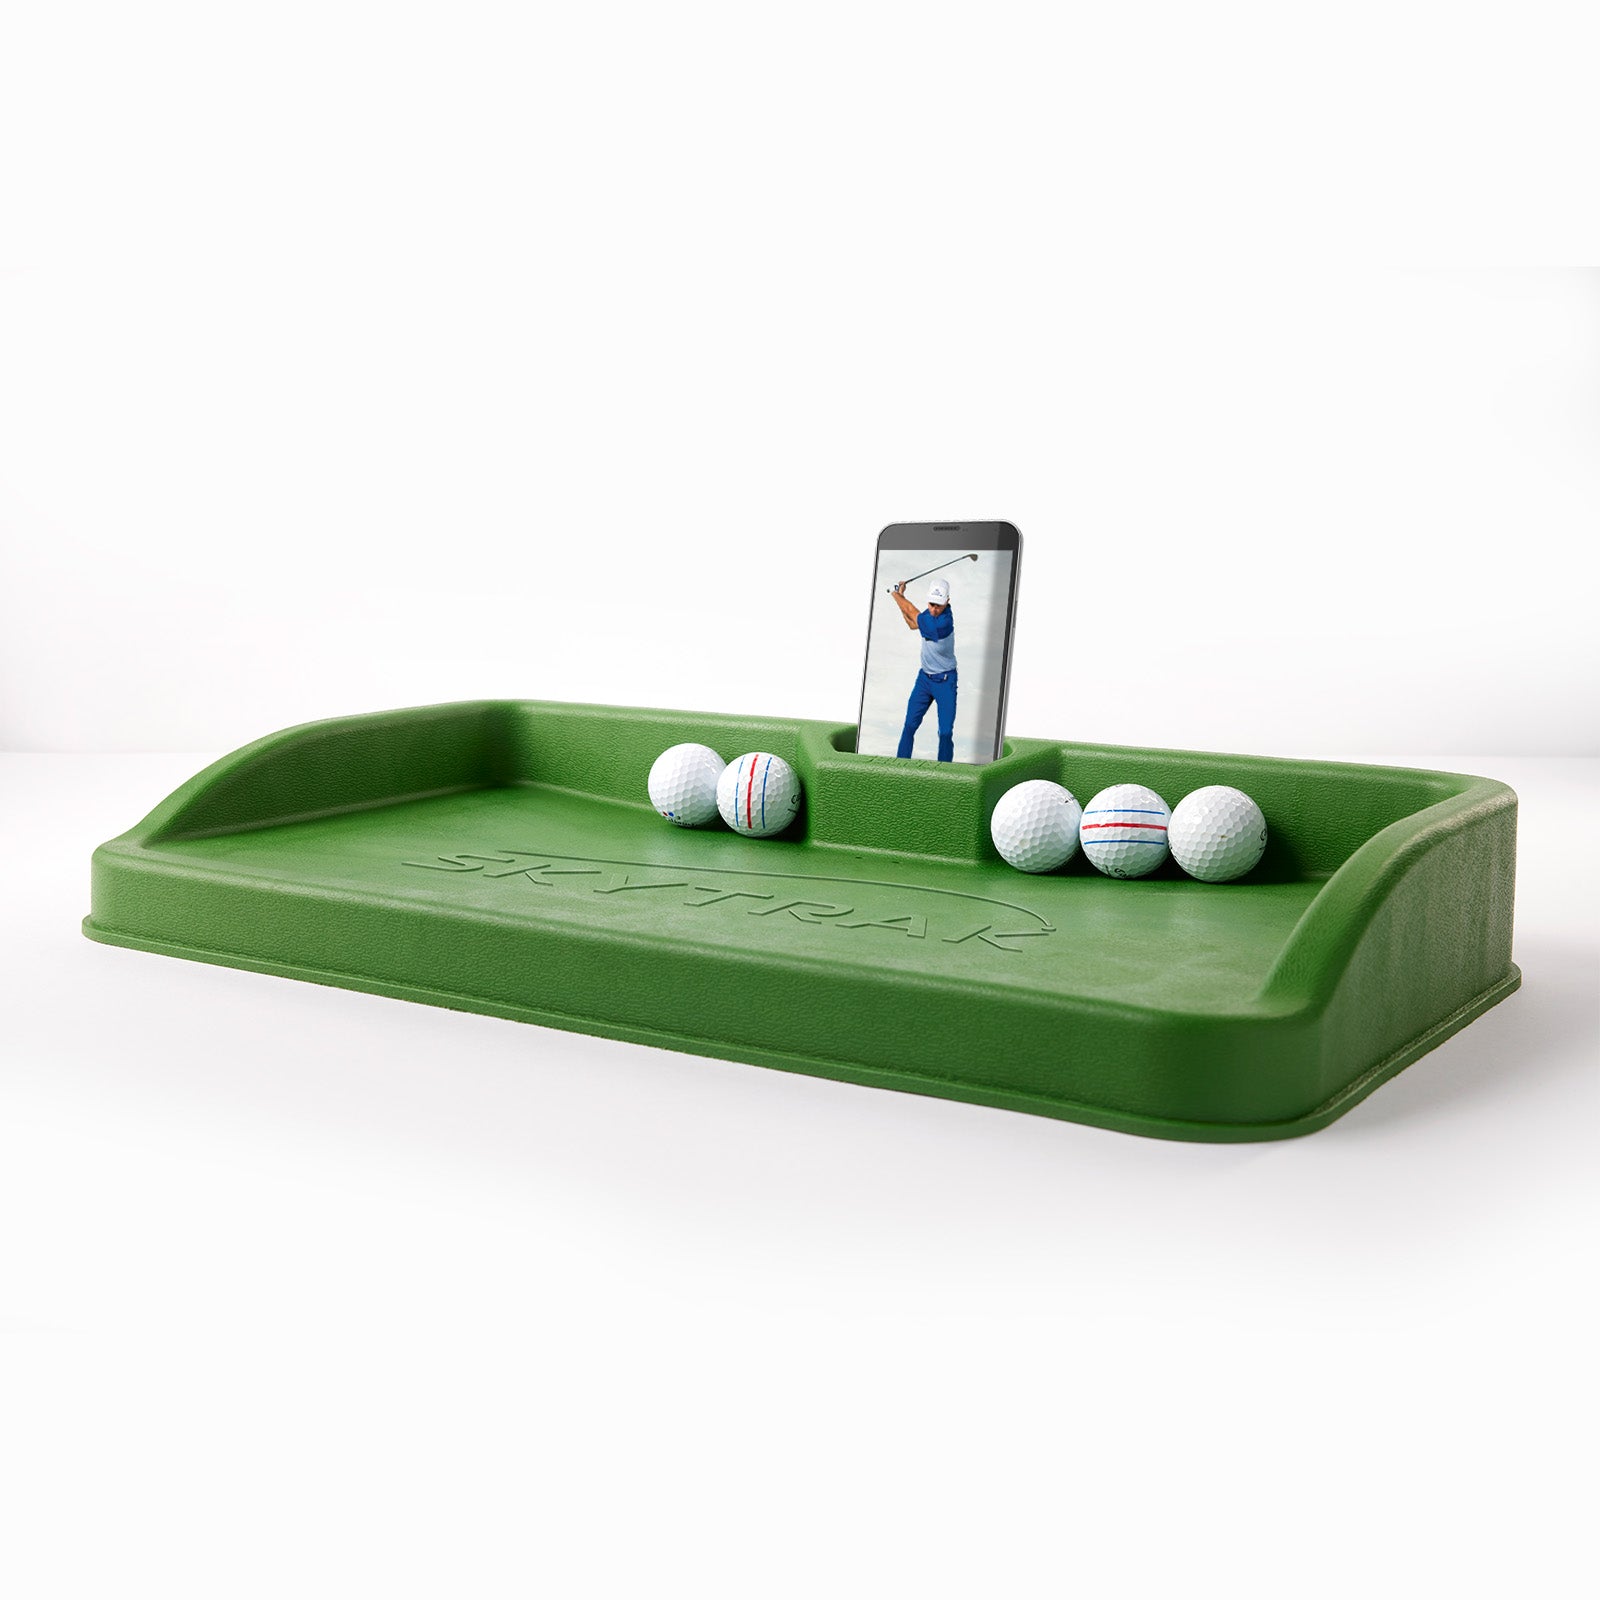 SKYTRAK golf ball tray with cell phone holder golf simulator accessories